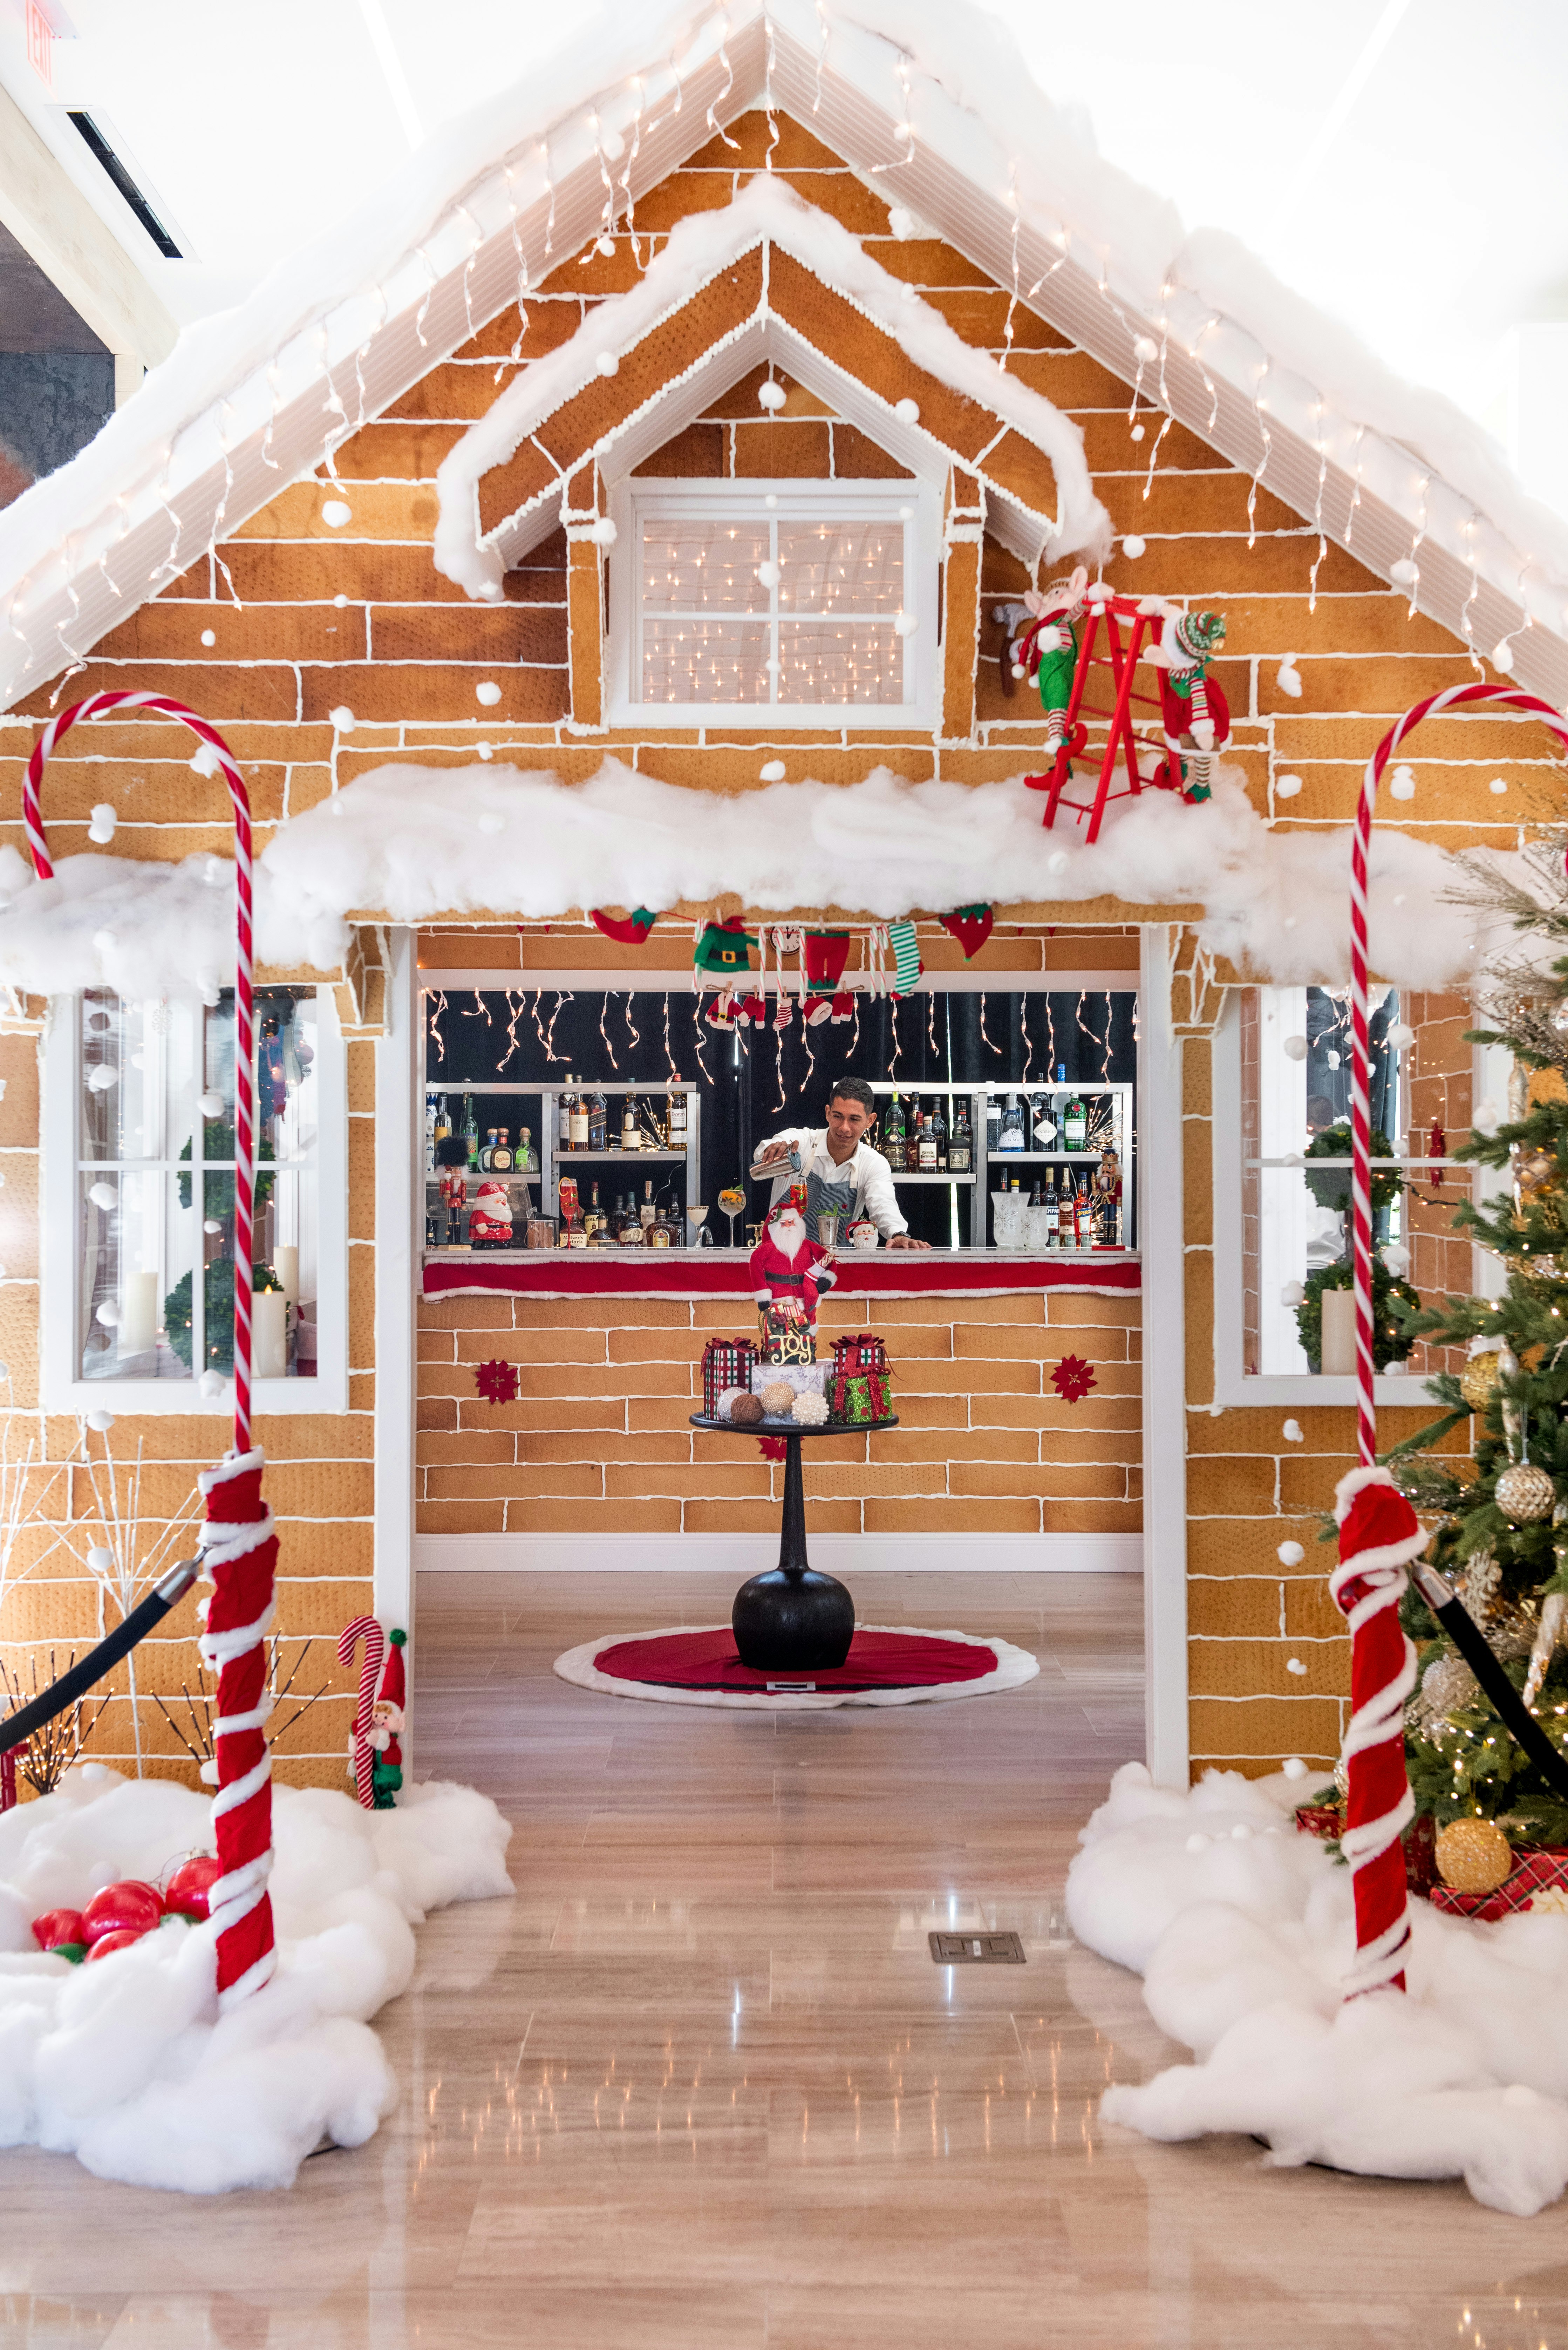 A life-size gingerbread house at Kimpton Seafire Resort + Spa; the house is a bar, and has been decorated with candy canes and fake snow. Through the door the bartender can be seen making cocktails. 